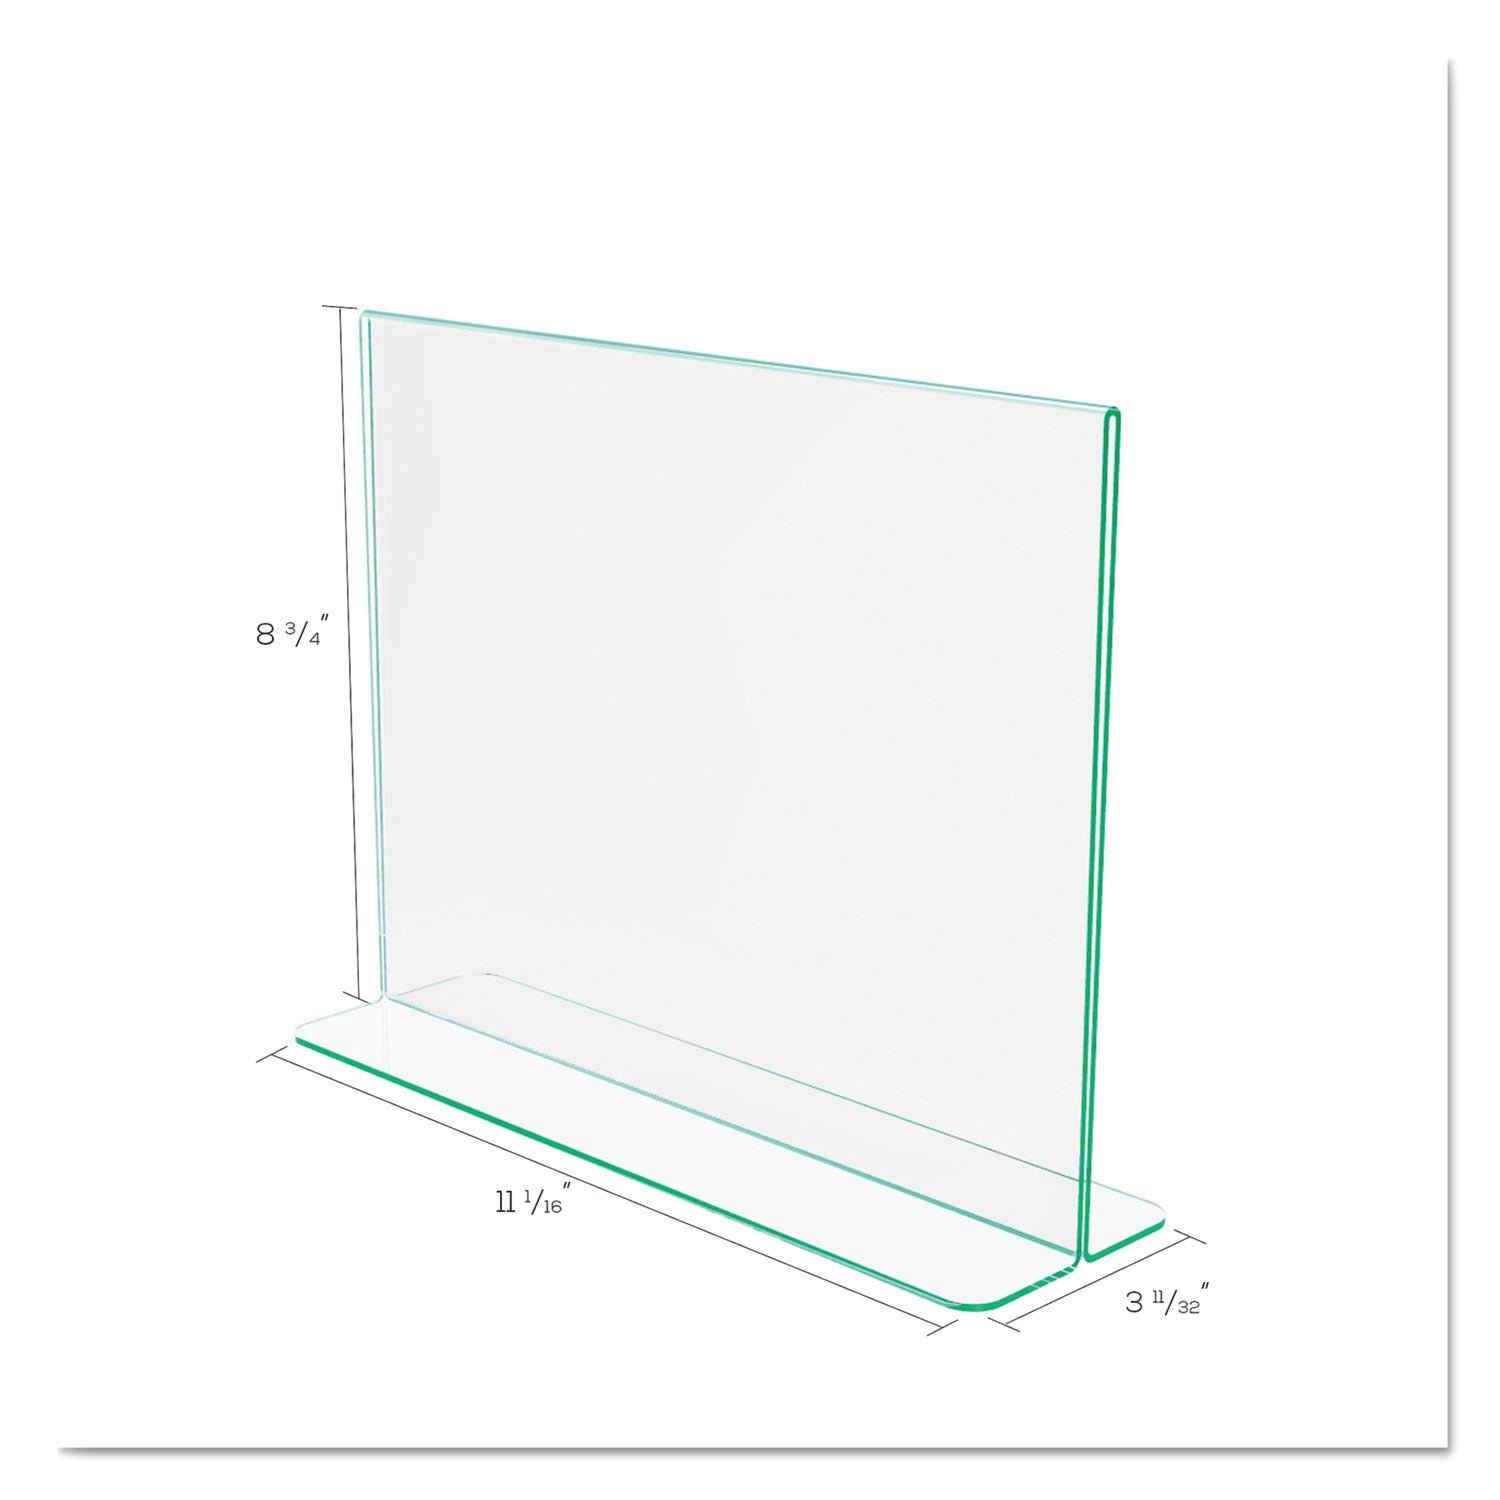 Superior Image Premium Green Edge Sign Holders, 11 x 8.5 Insert, Clear/Green - 